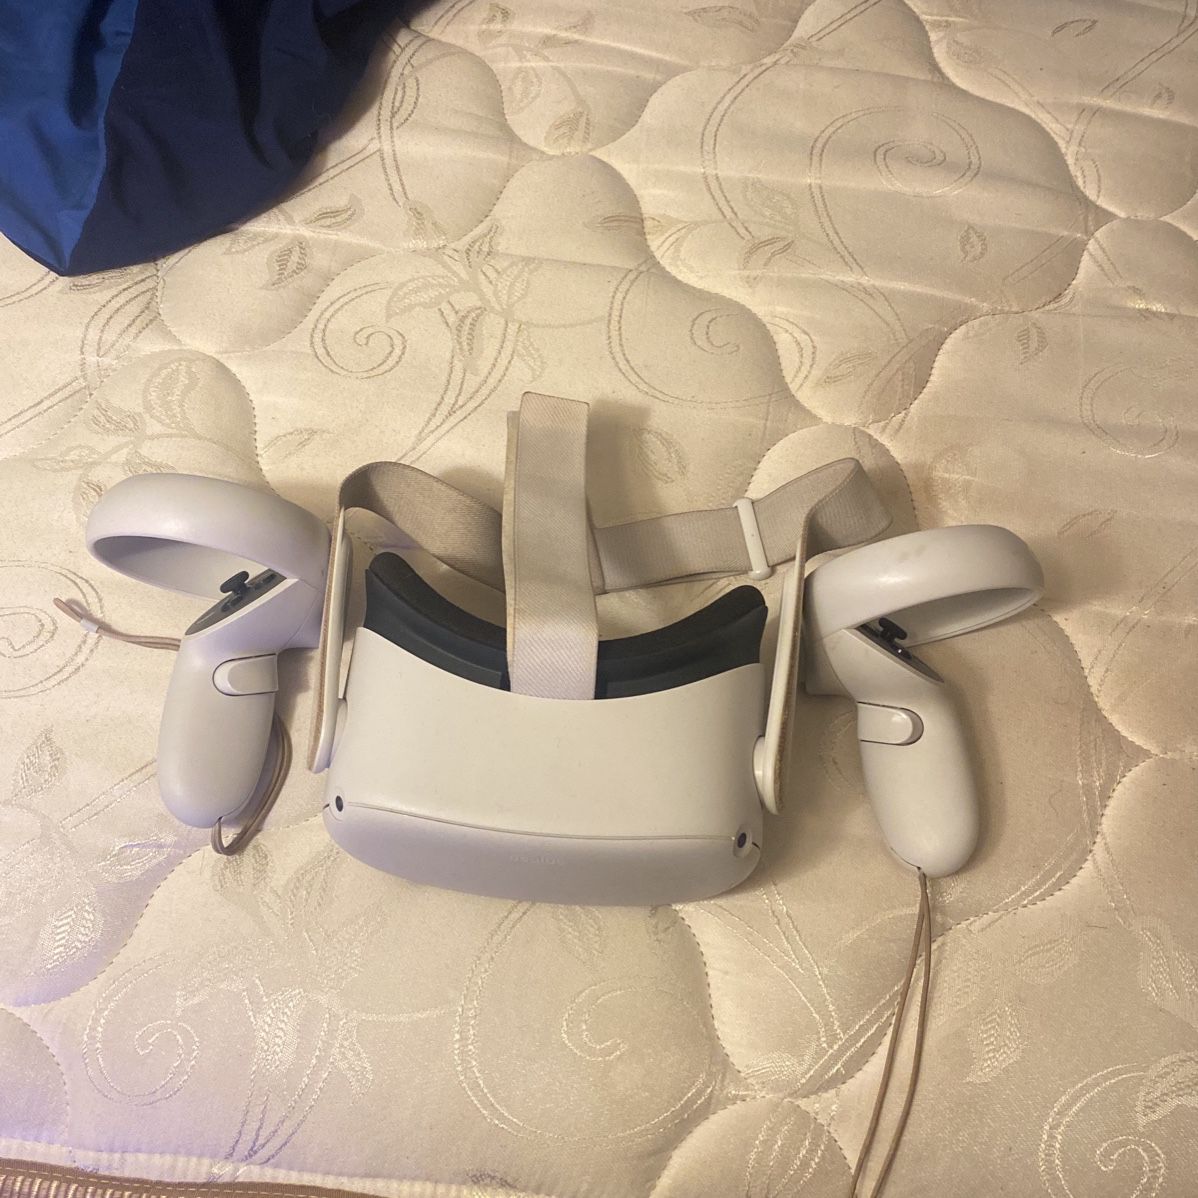 Meta Quest 2: All-In-One Wireless VR Headset - 128GB